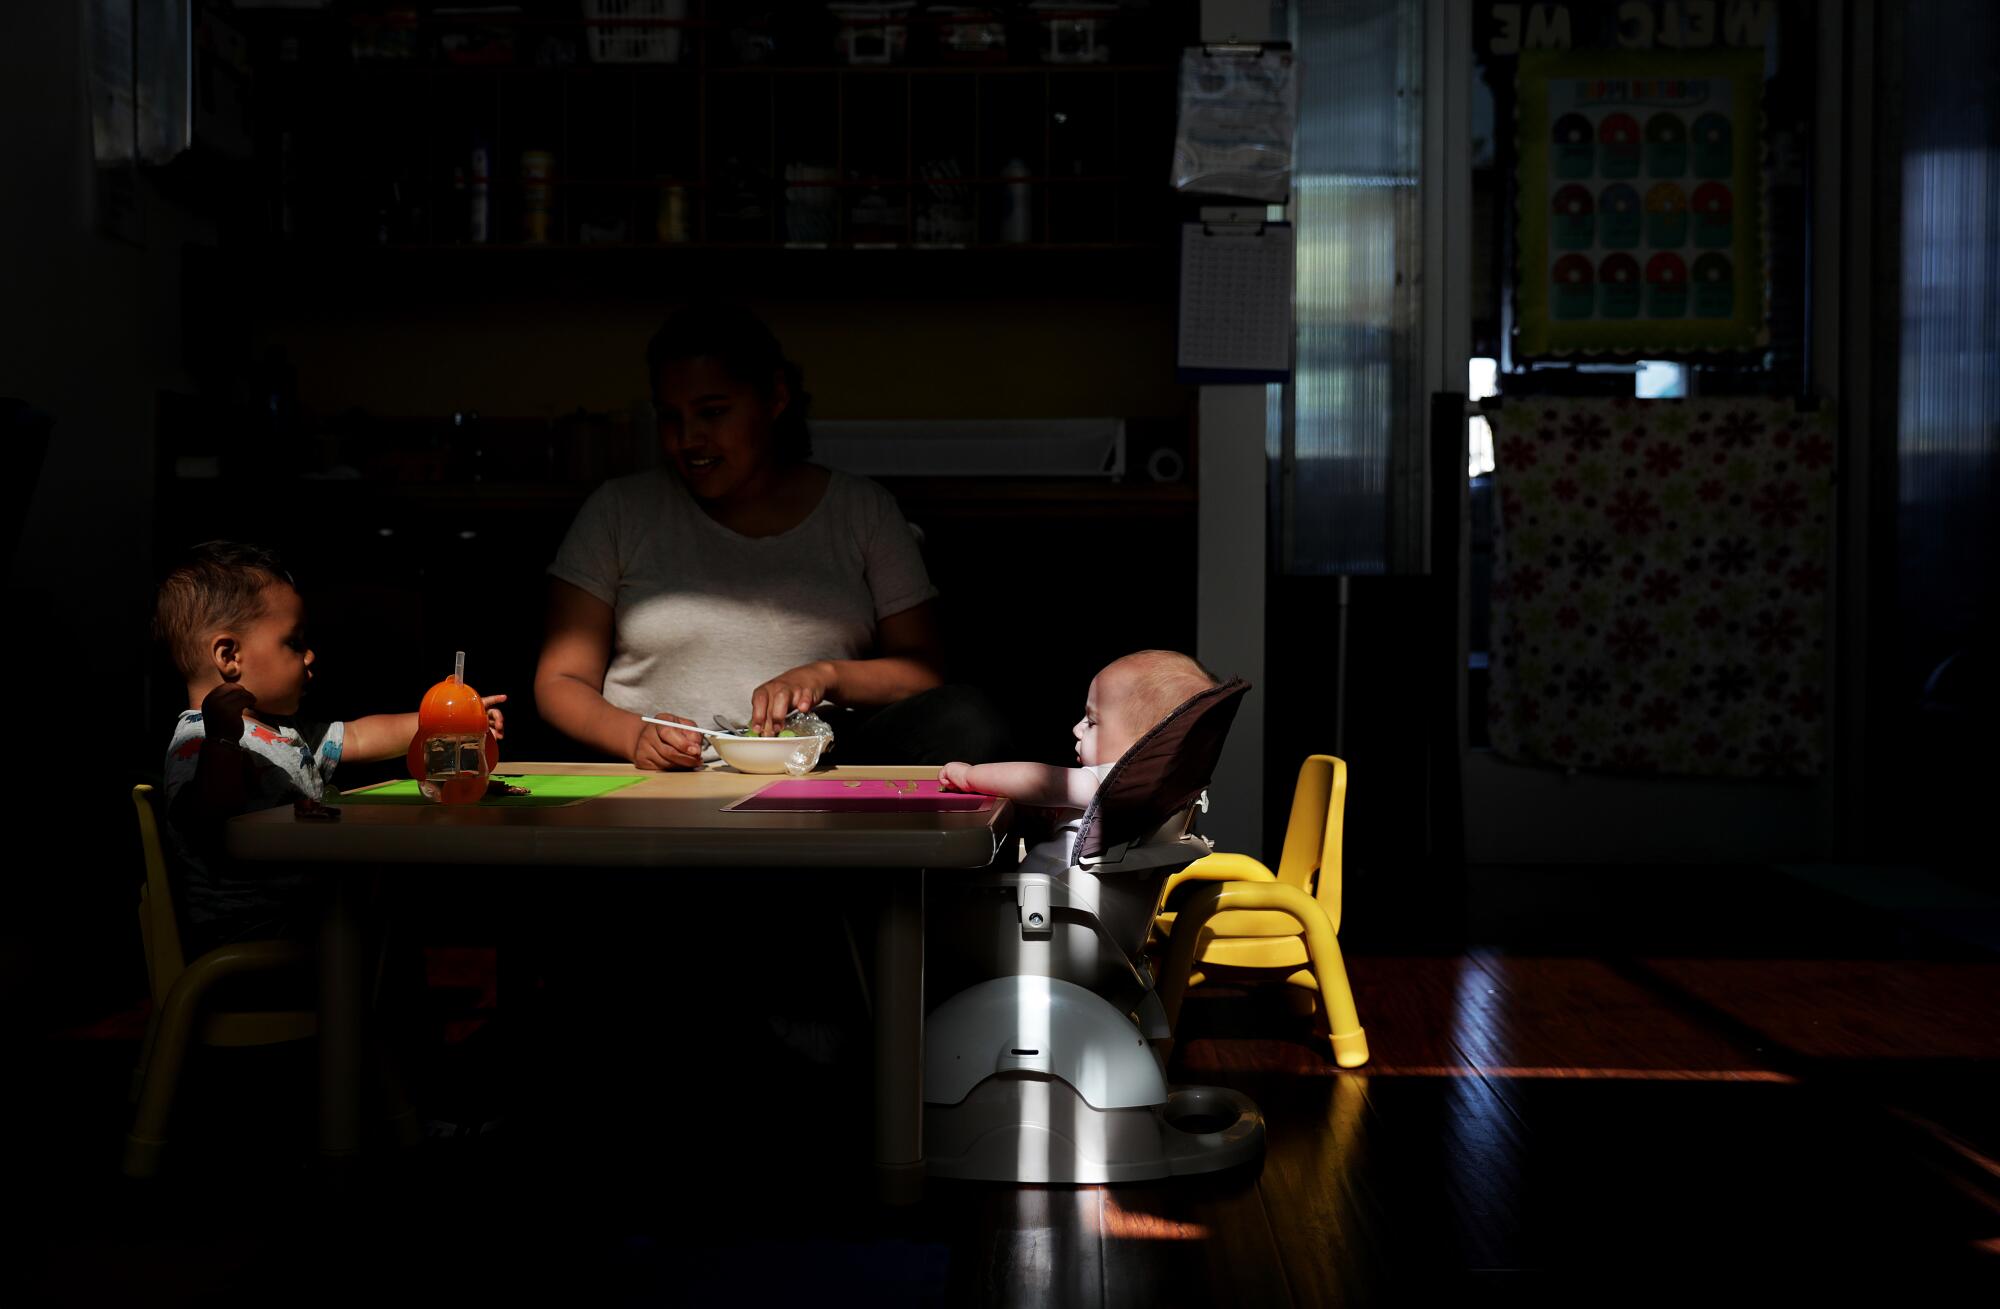 A baby seated at a children's table in a darkened room visible through a sliver of light.